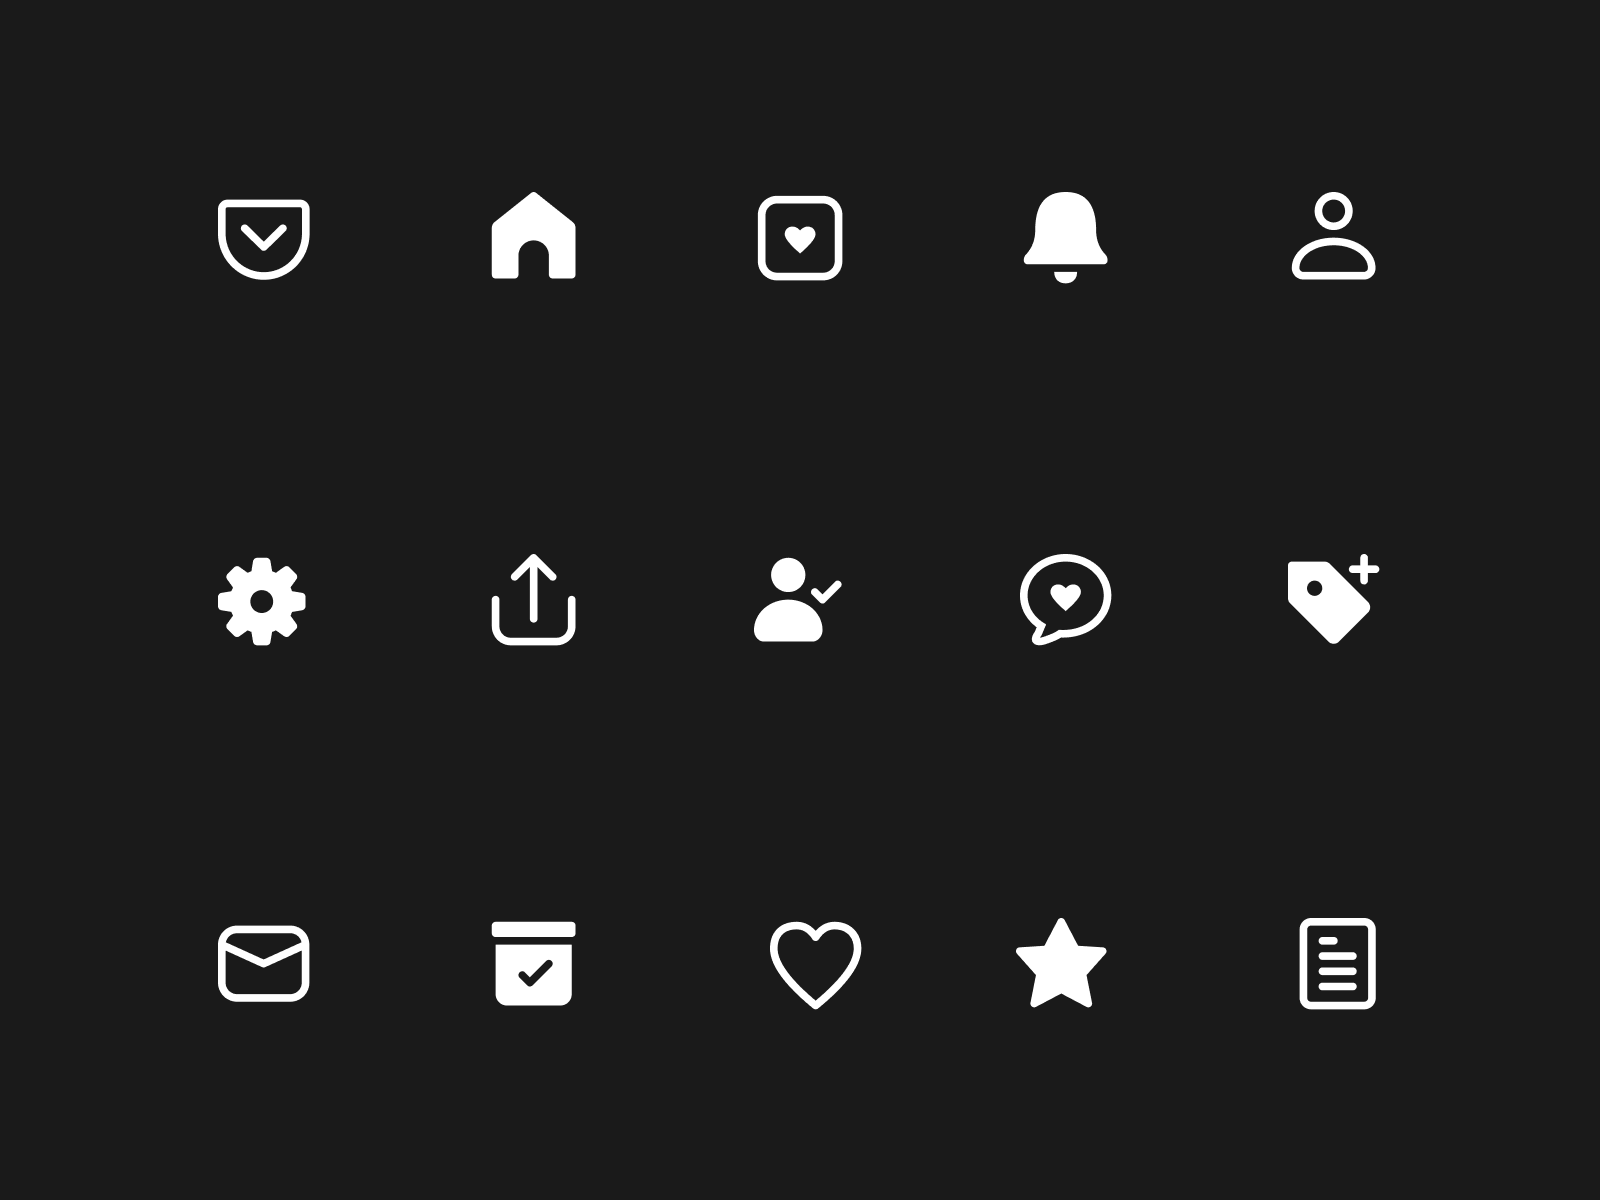 Refreshed icons! by Tony Murphy on Dribbble